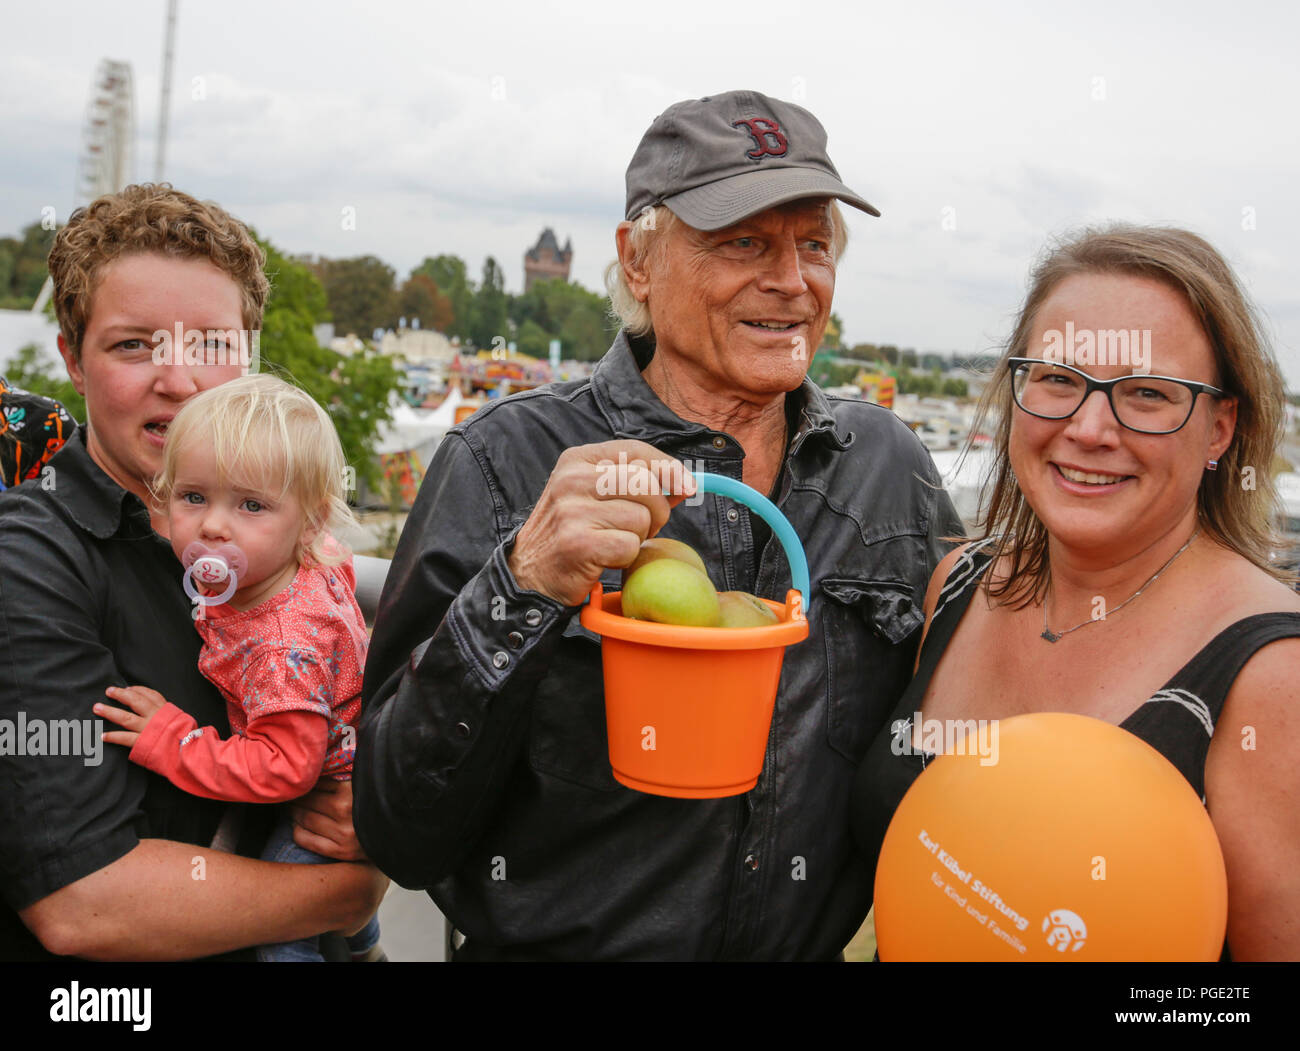 Worms, Germany. 24th Aug, 2018. Terence Hill and members of the Karl-Kubel-Foundation are pictured on the bridge. Italian actor Terence Hill visited the German city of Worms, to present his new movie (My Name is somebody). Terence Hill added the stop in Worms to his movie promotion tour in Germany, to visit a pedestrian bridge, that is unofficially named Terence-Hill-Bridge (officially Karl-Kubel-Bridge). Credit: Michael Debets/Pacific Press/Alamy Live News Stock Photo